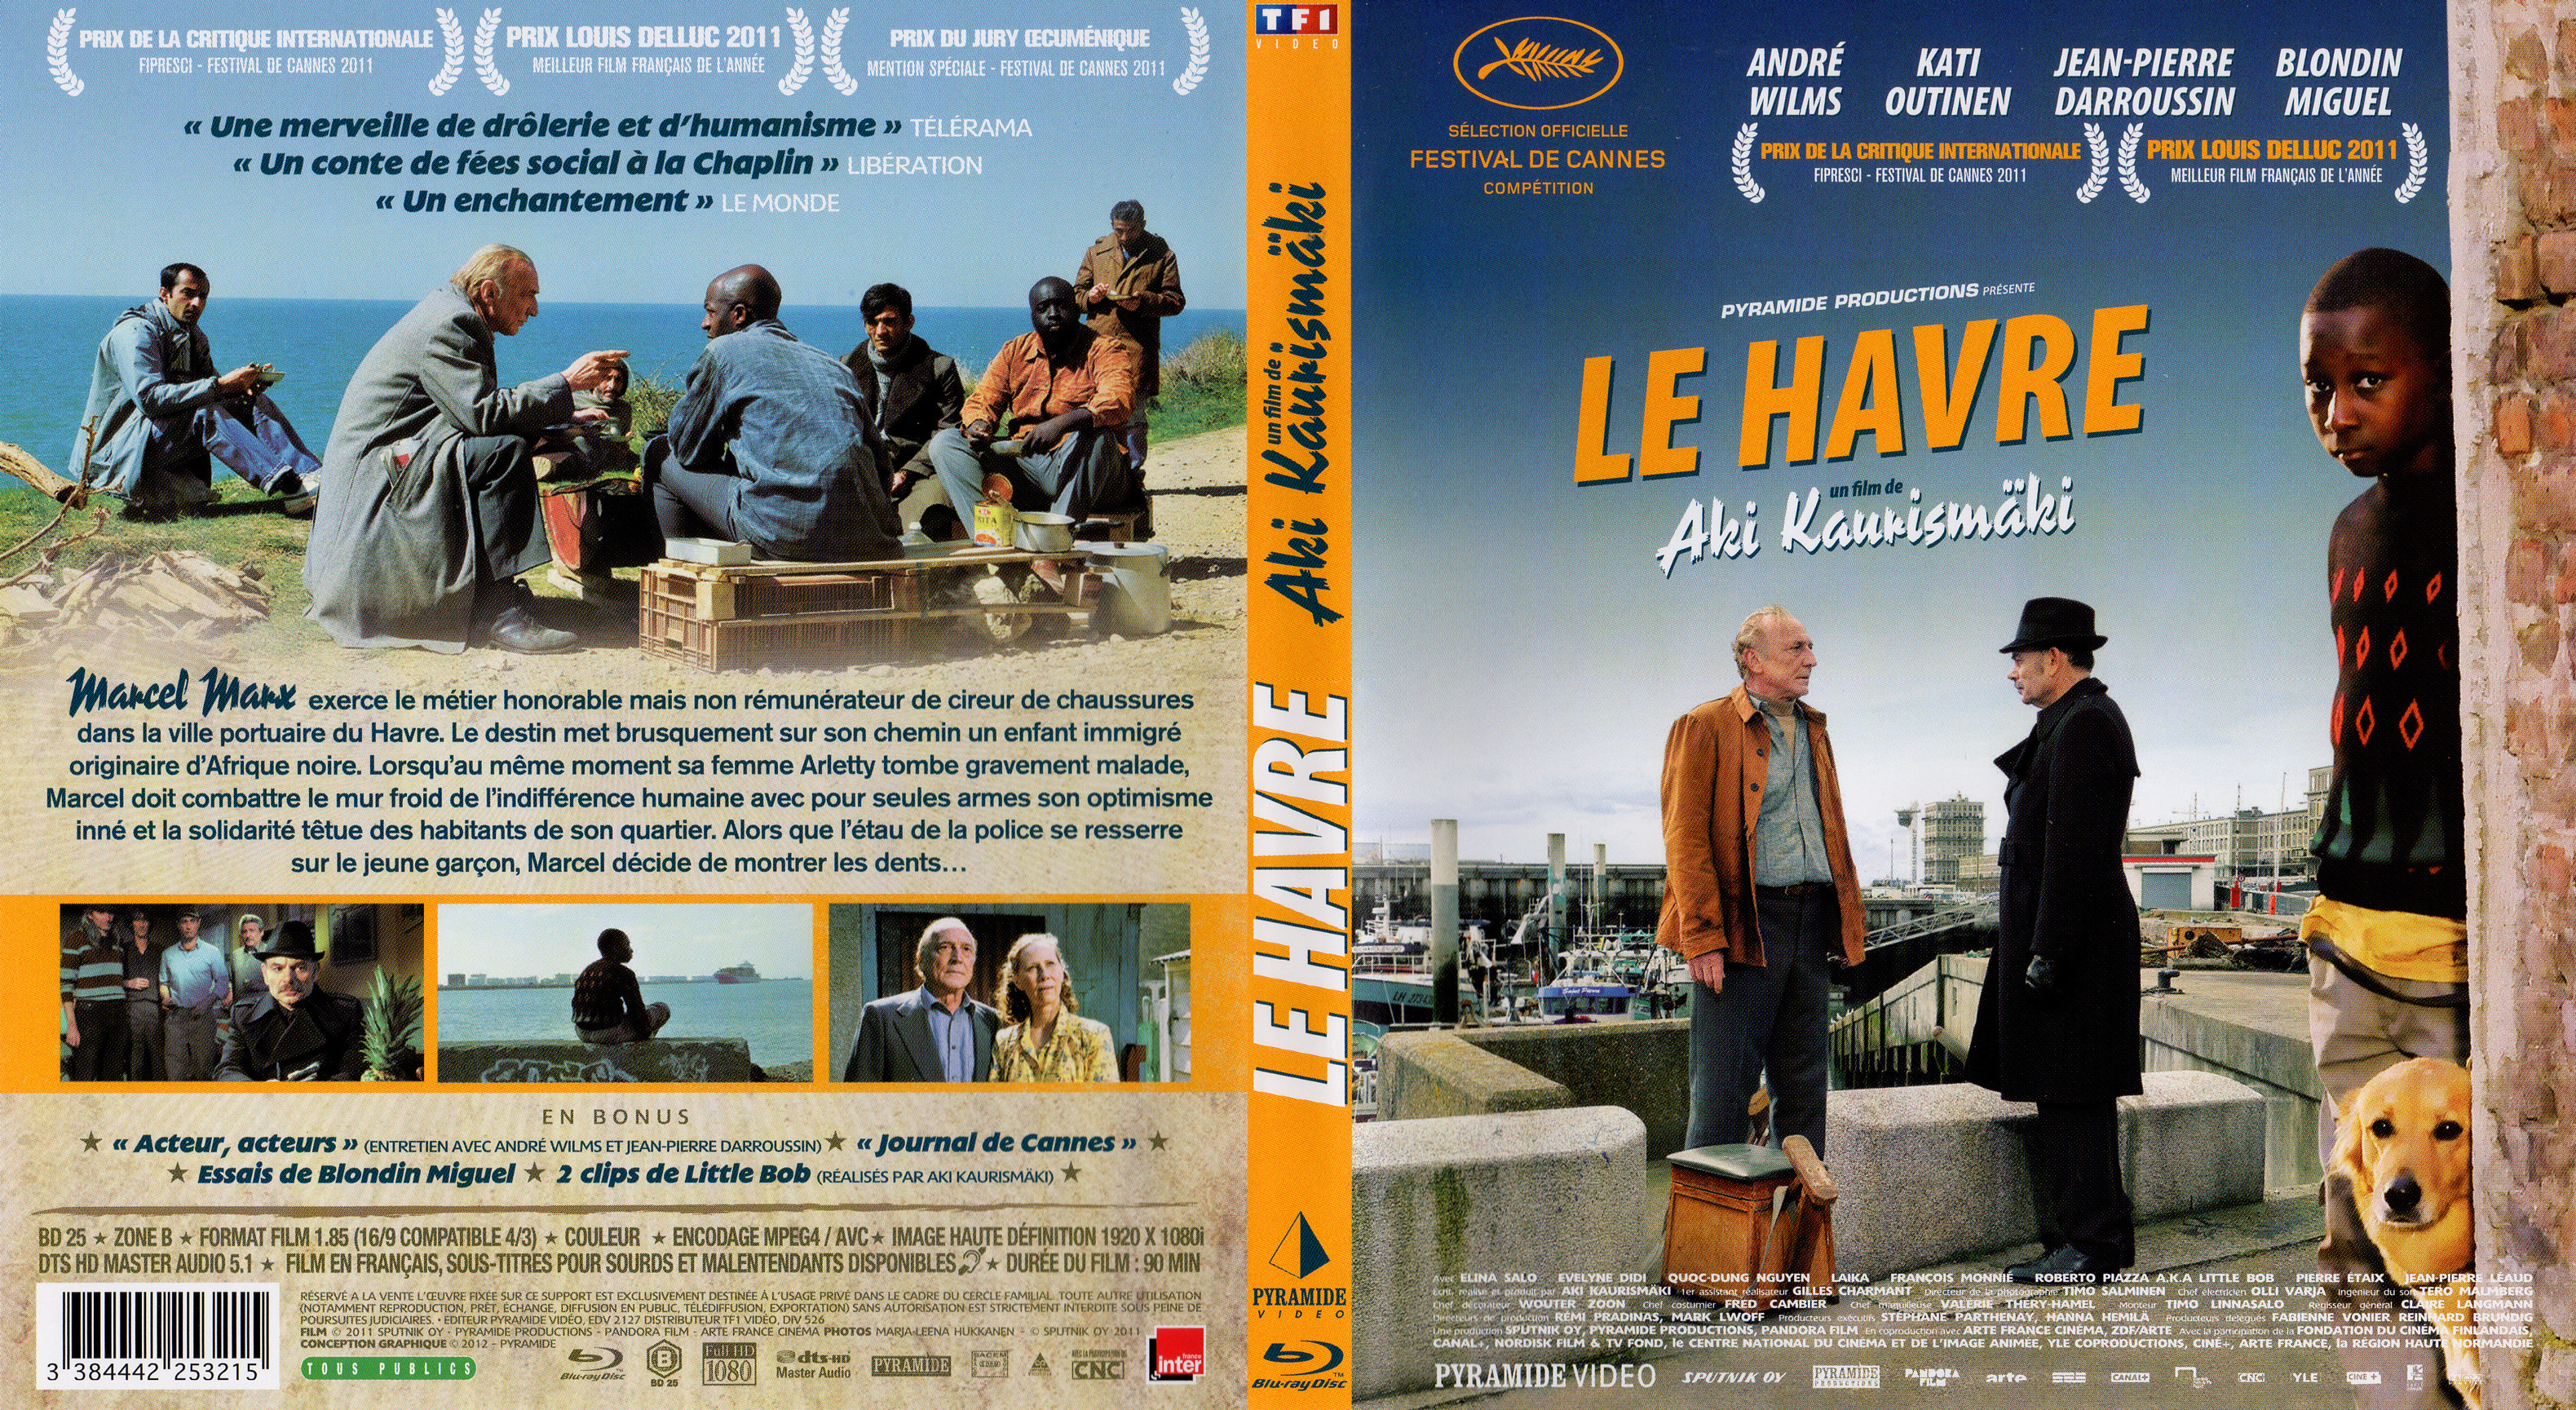 Jaquette DVD Le Havre (BLU-RAY)